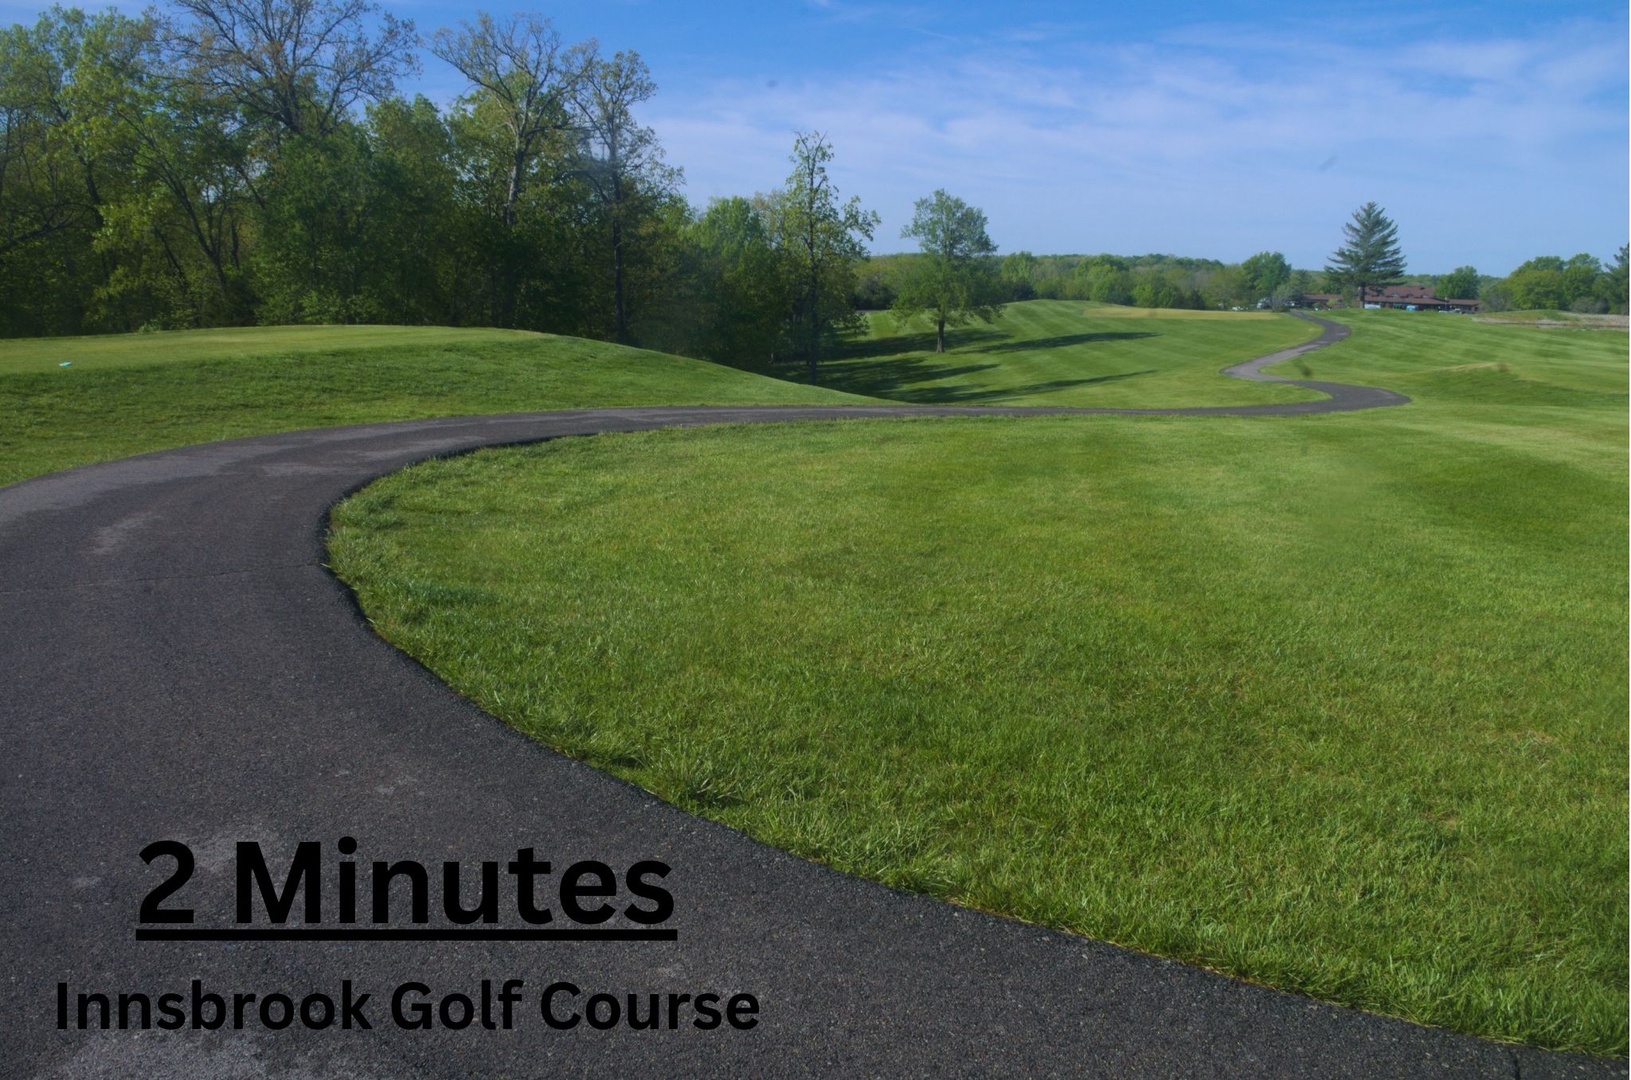 The Innsbrook golf course is a beautiful, well manicured escape!